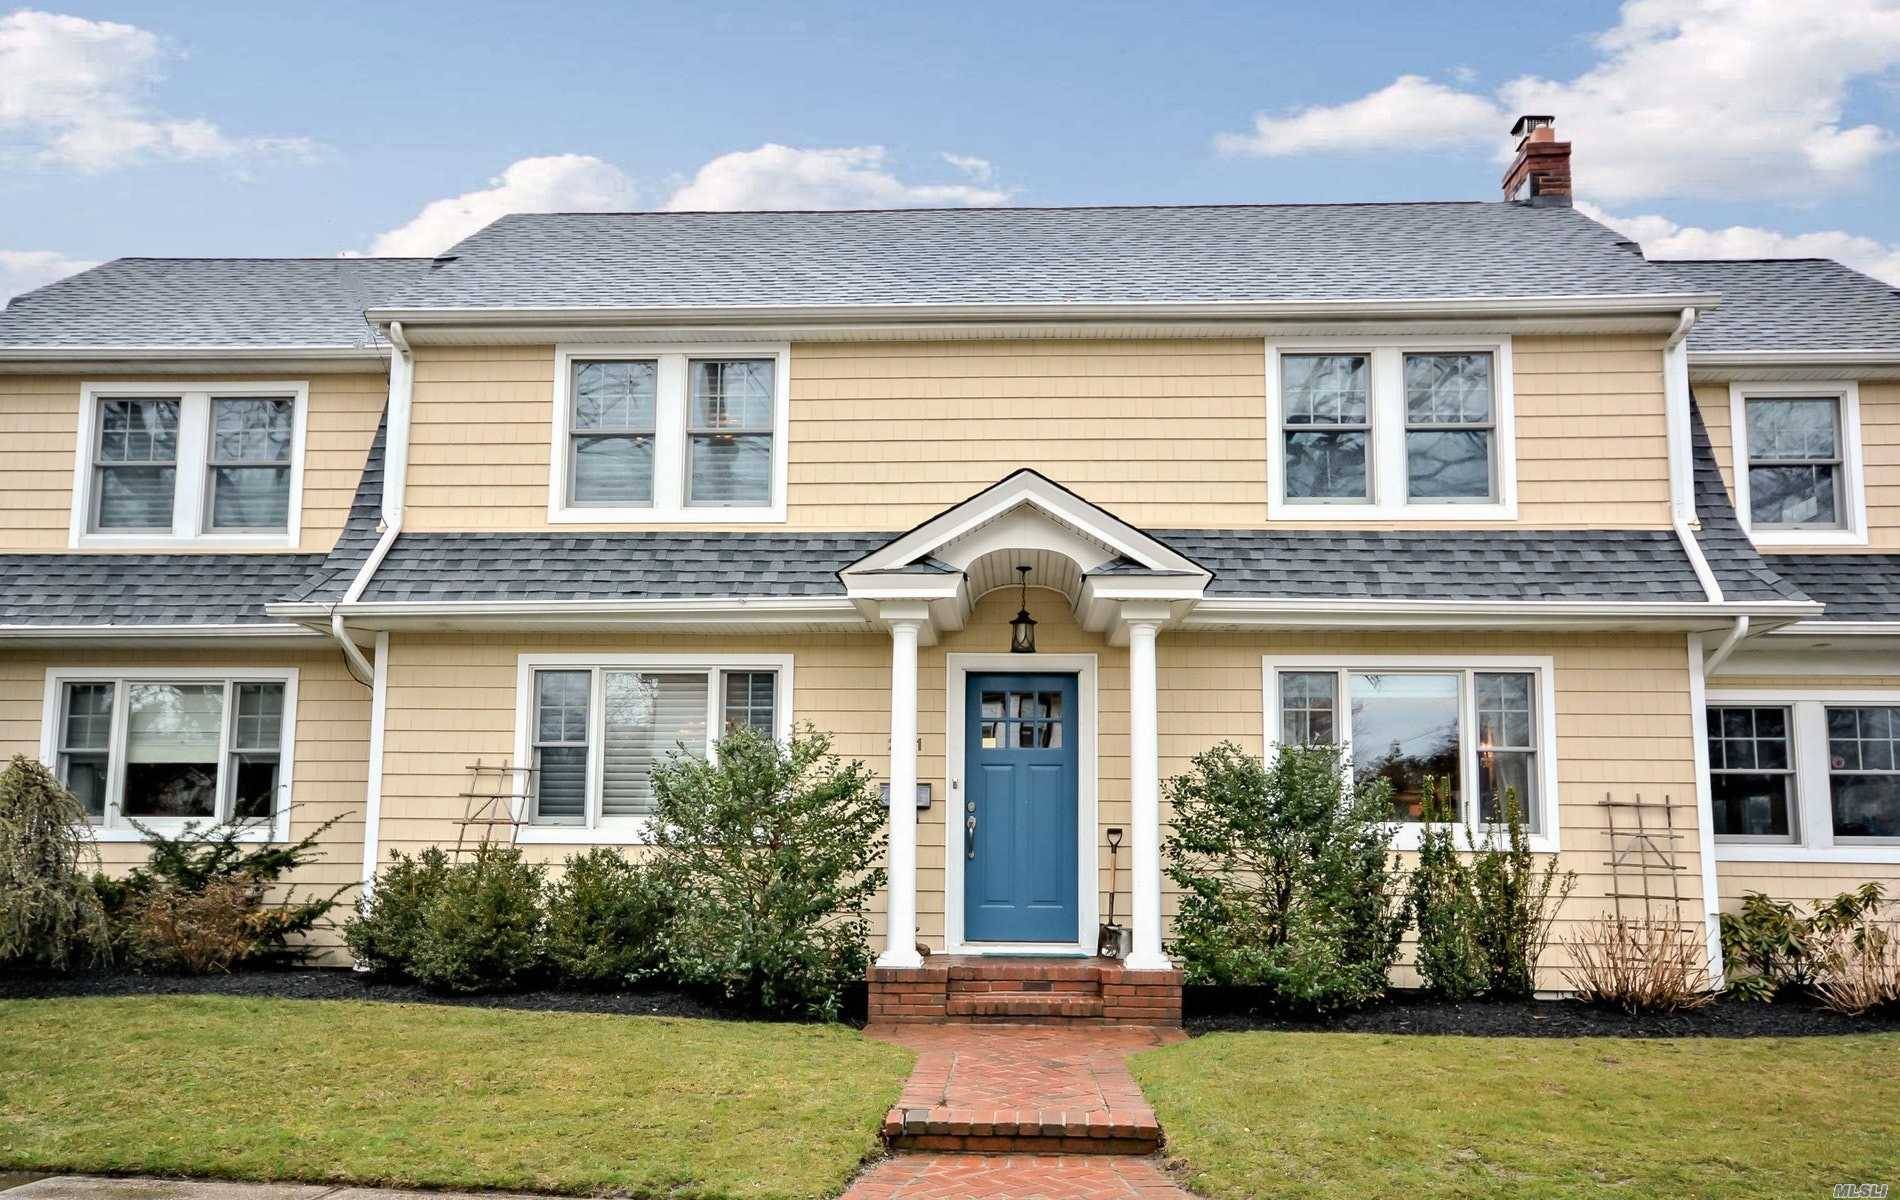 Move Right Into This Gracious,Elegant Meticulously Updated Colonial.